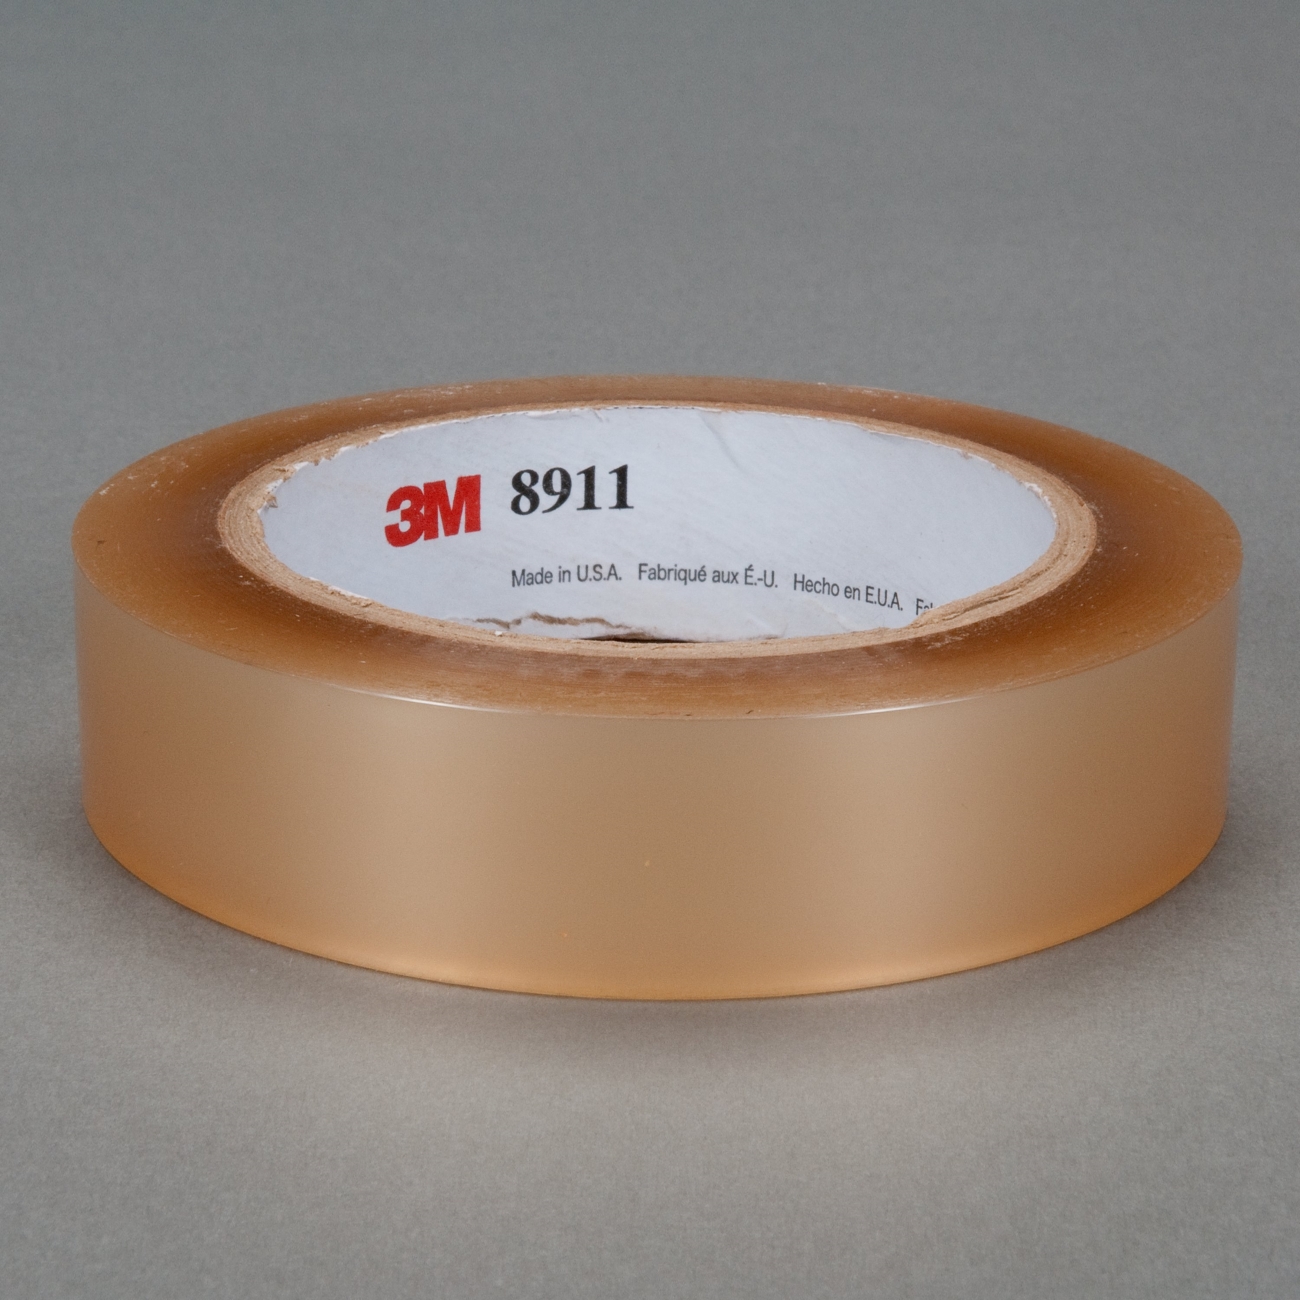 3M polyester adhesive tape 8911, transparent, 51 mm x 66 m, 0.06 mm